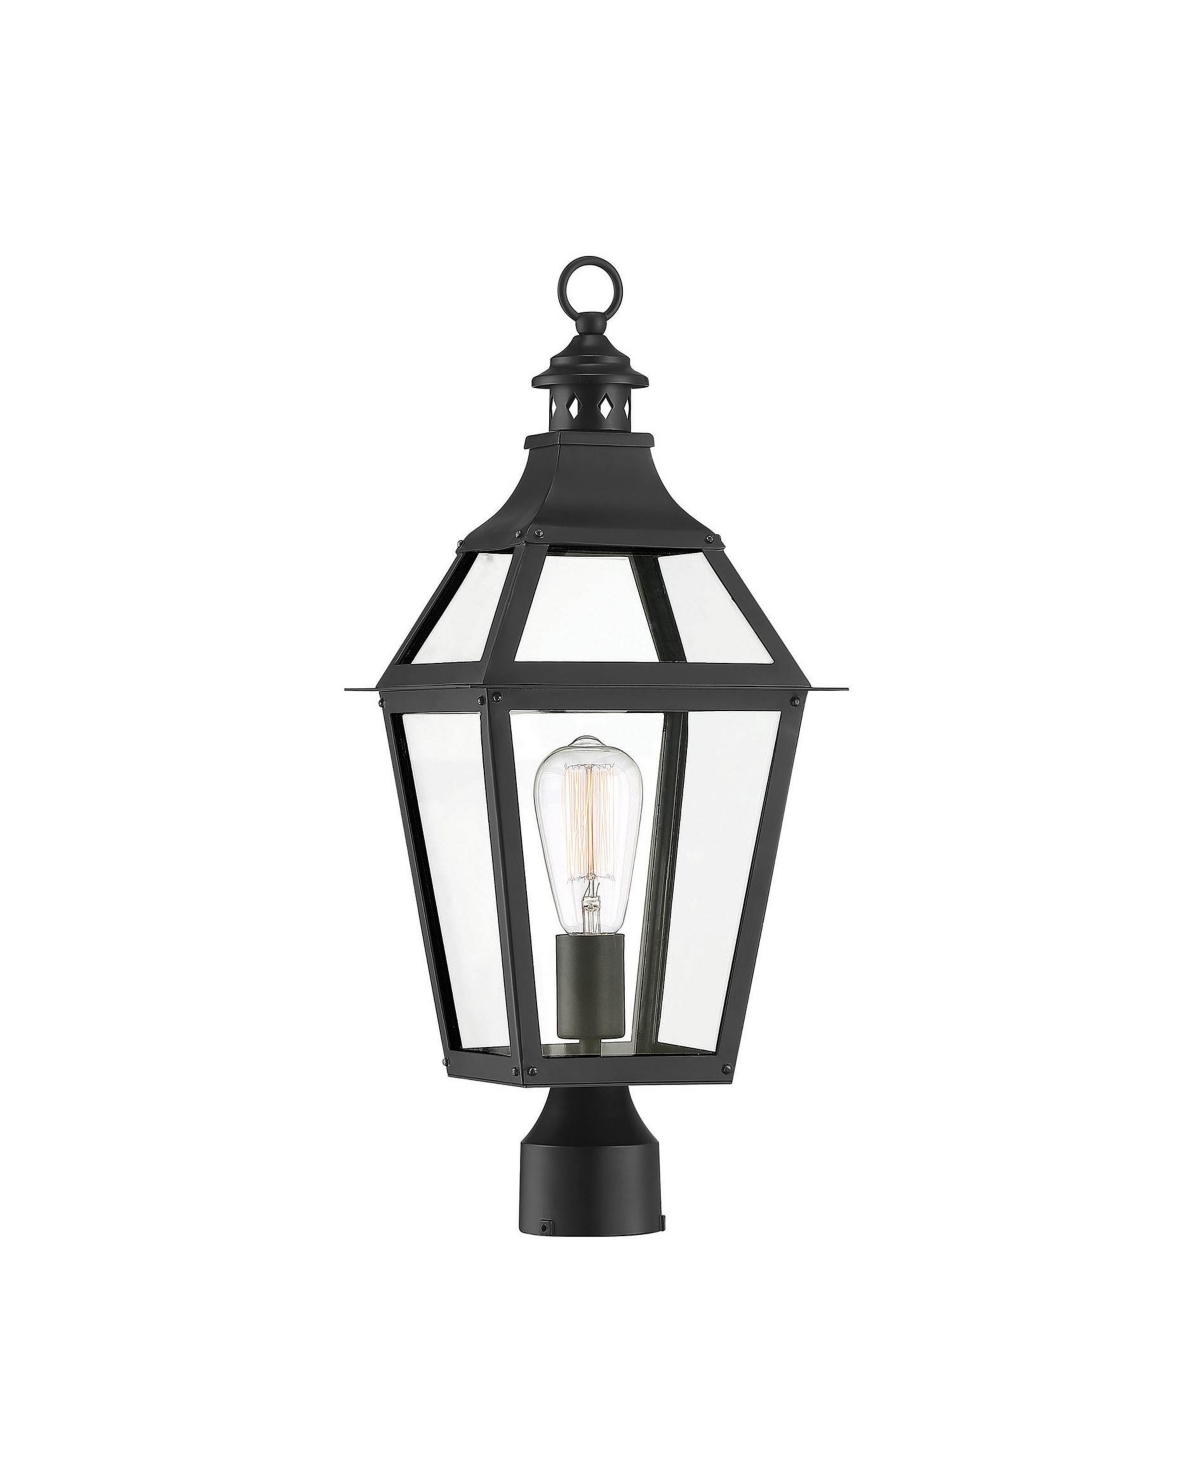 Jackson 1-Light Outdoor Post Lantern in Matte Black with Gold Highlights - Black/gold highlighted